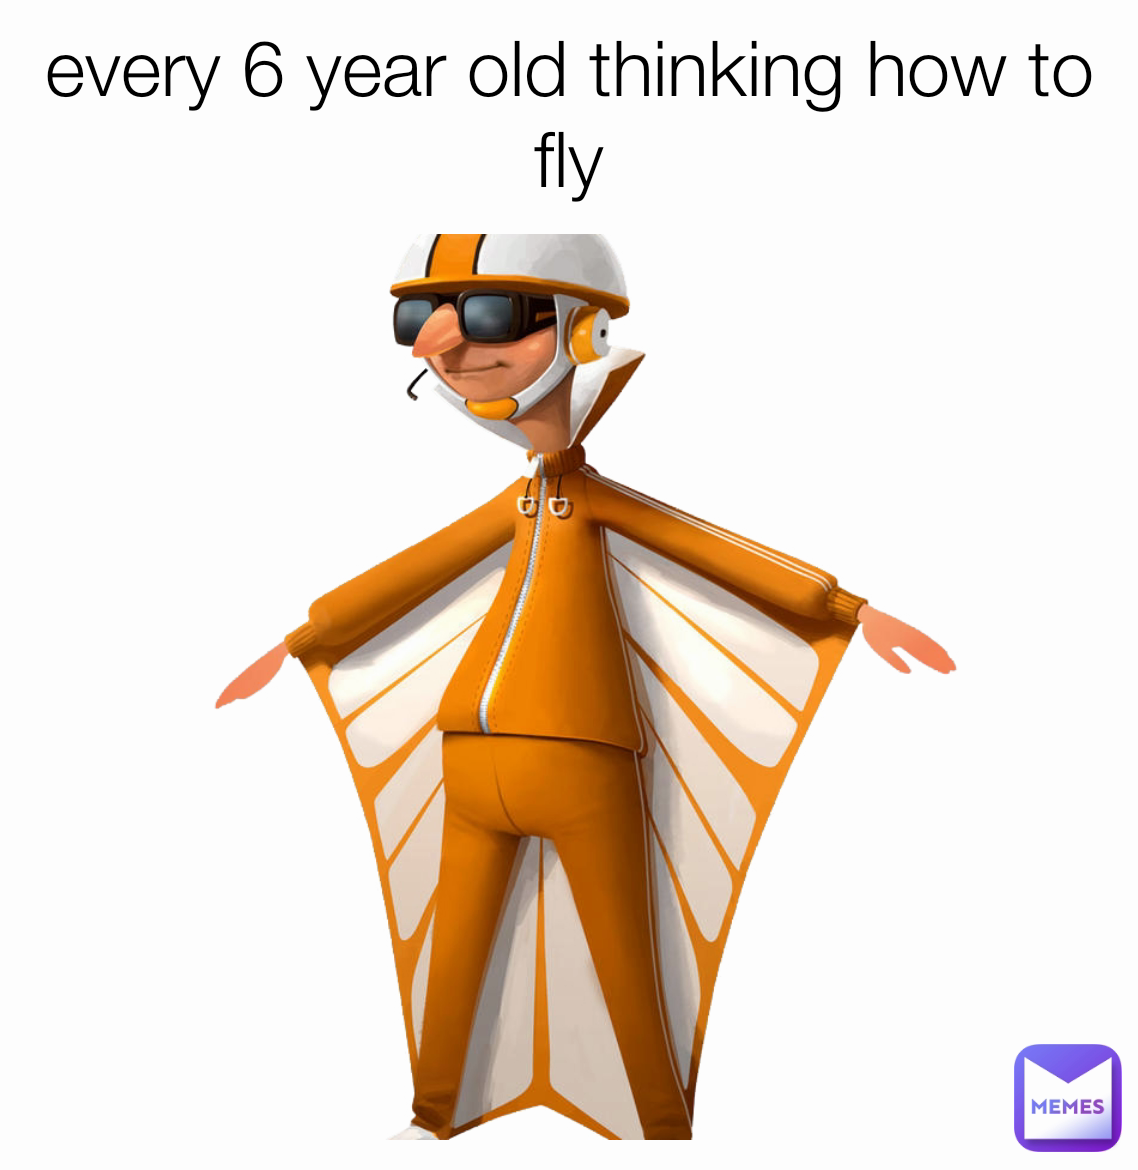 every 6 year old thinking how to fly
